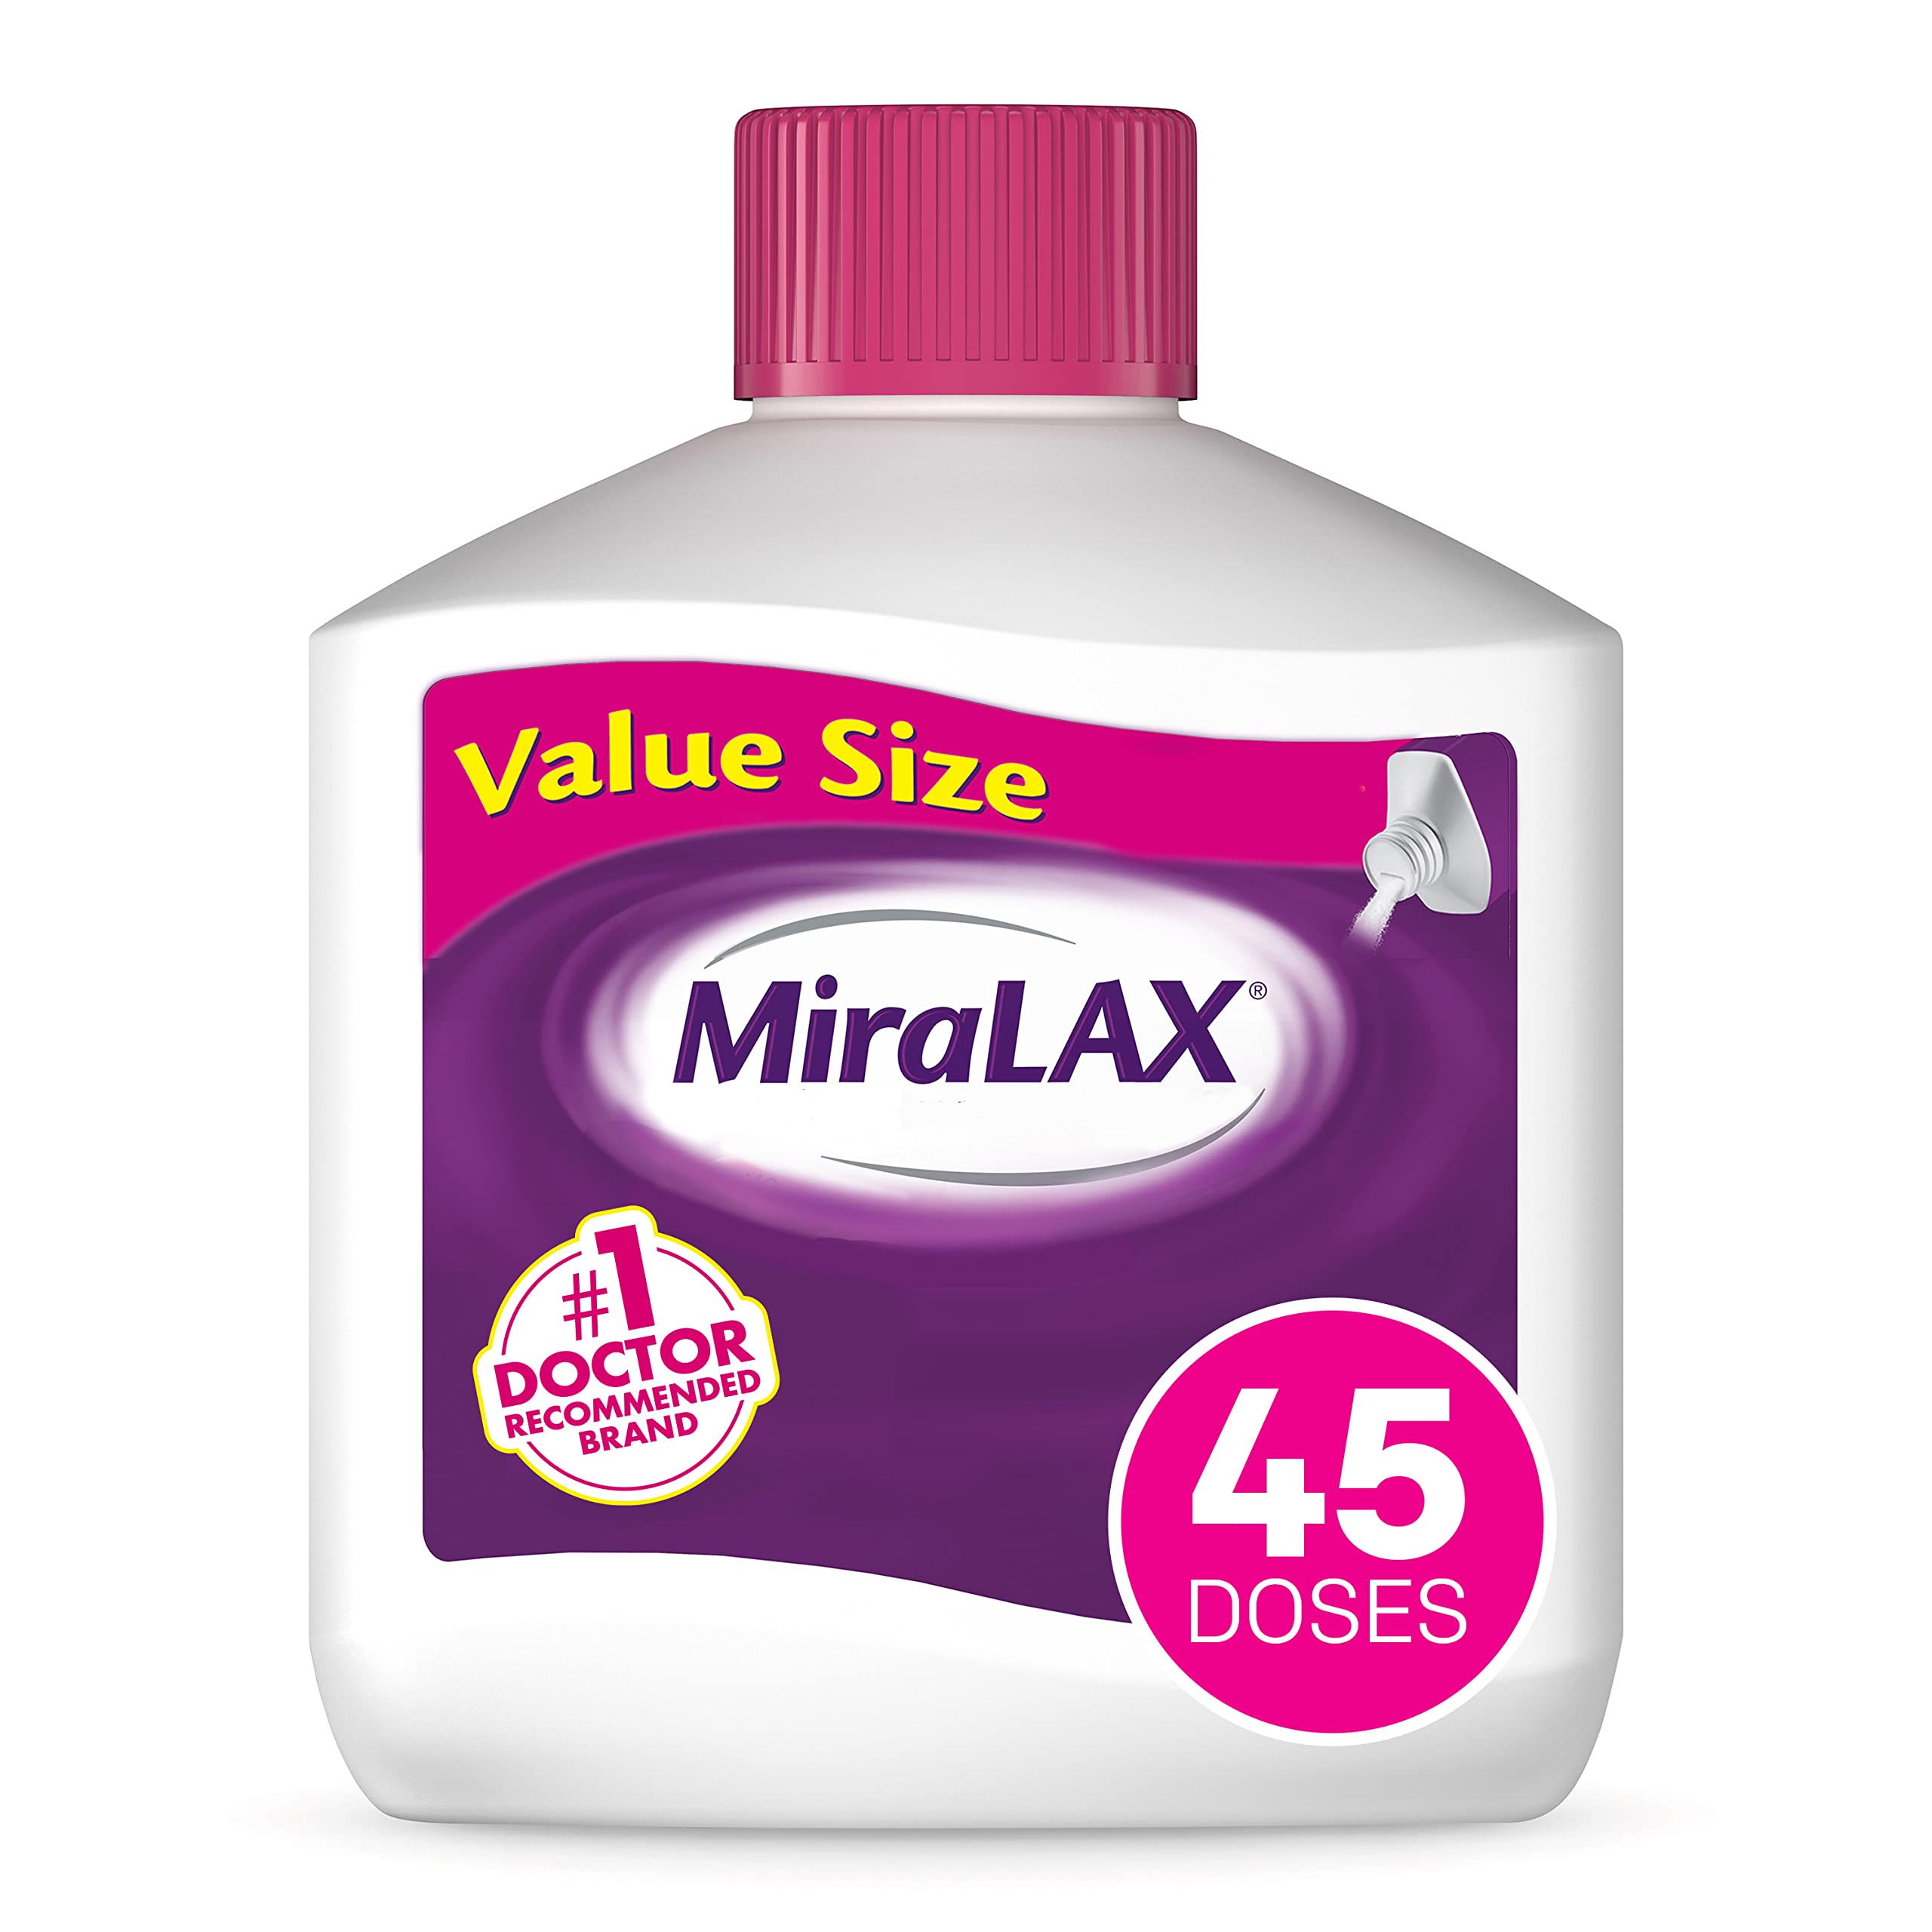 MiraLAX Gentle Constipation Relief Laxative Powder, Stool Softener with PEG 3350, Works Naturally with Water in Your Body, No Harsh Side Effects, Osmotic Laxative, #1 Physician Recommended, 45 Dose